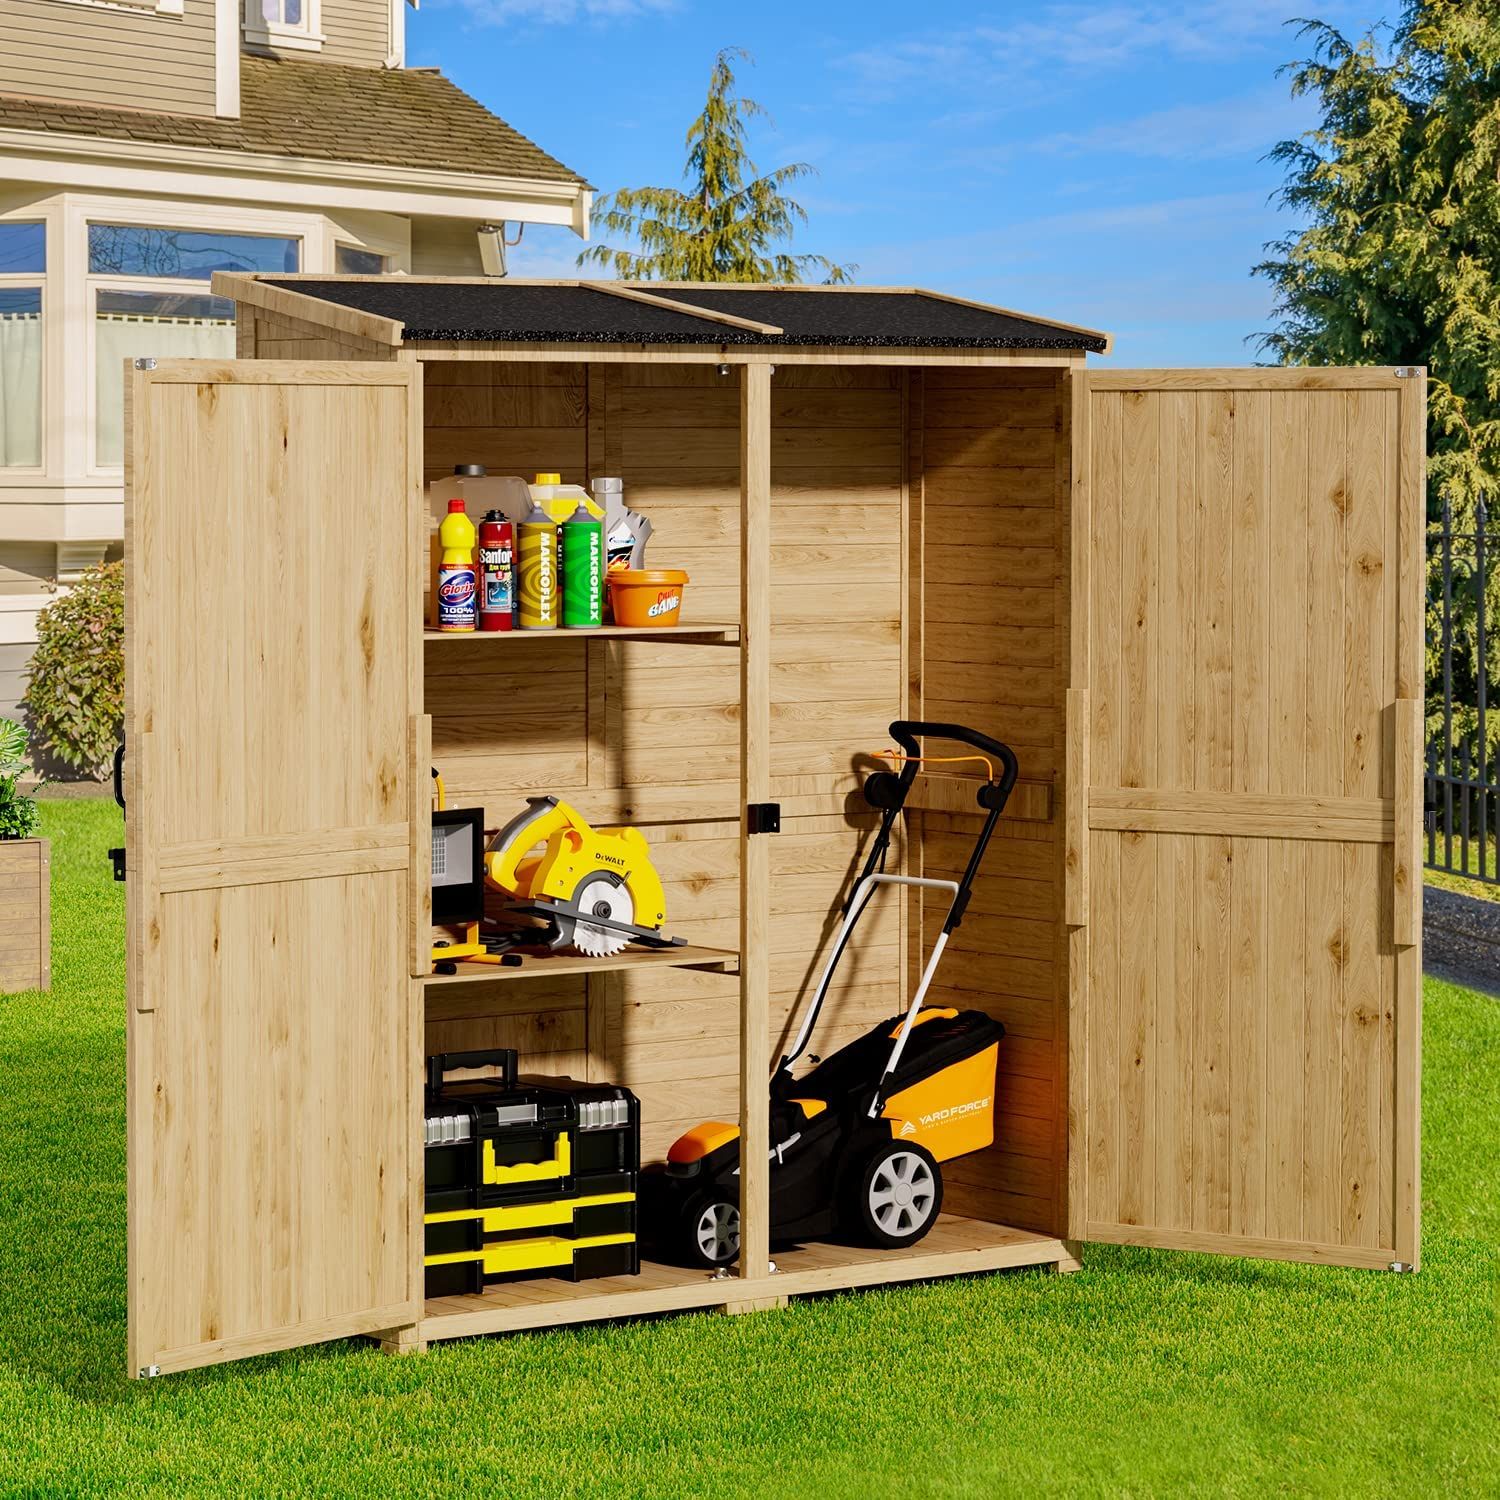 Gizoon 6’ x 4’ Outdoor Storage Cabinet